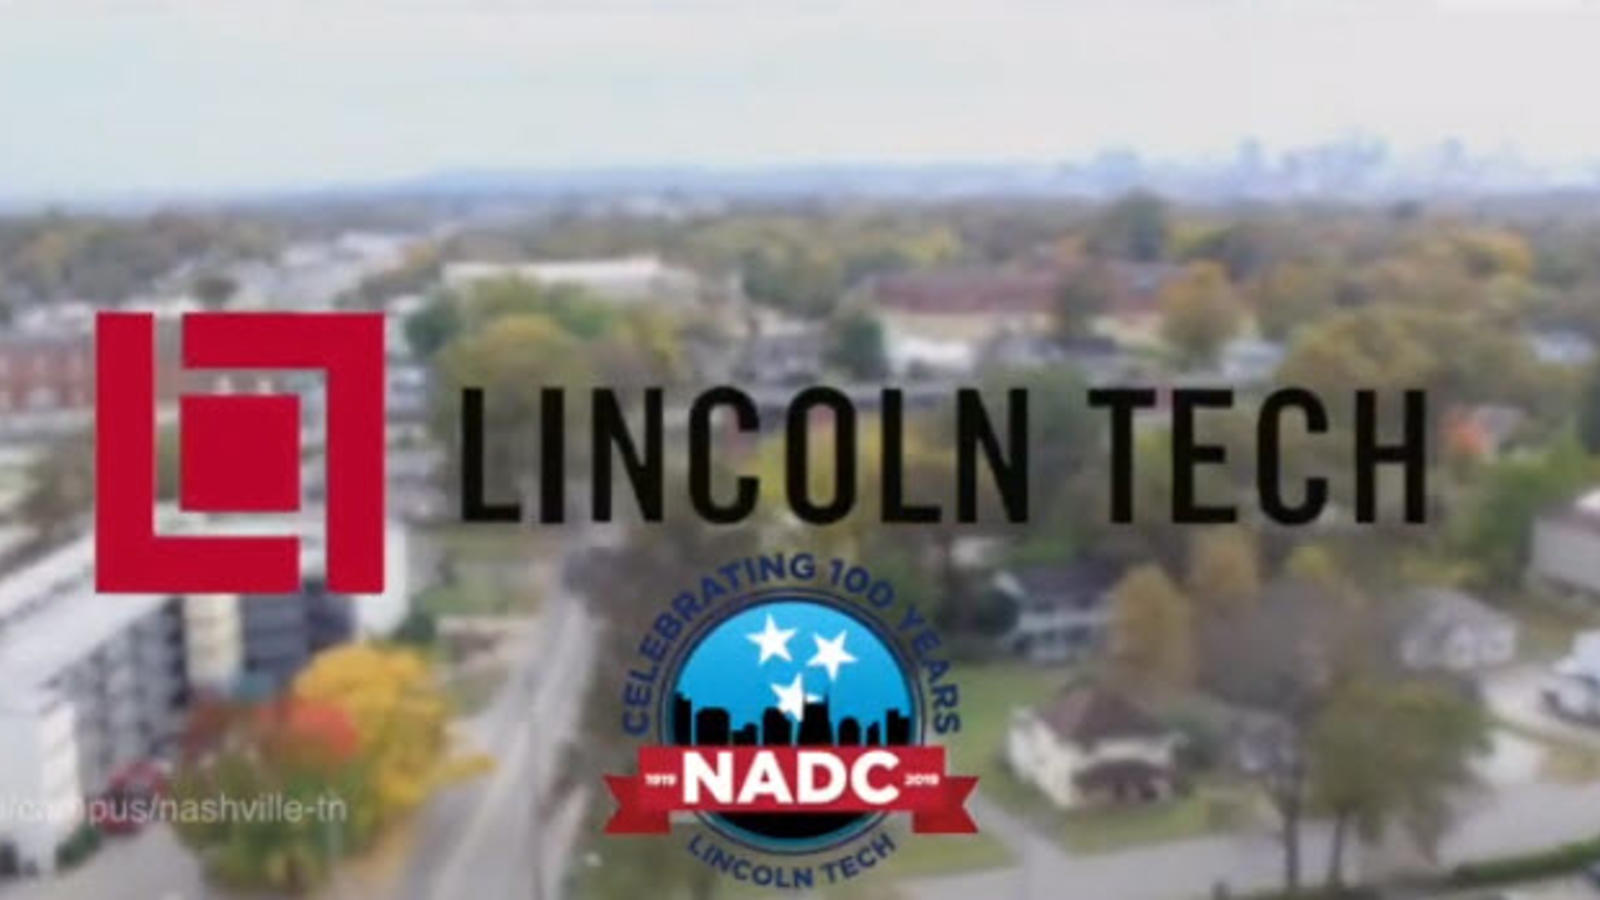 Lincoln Tech Is Celebrating 100 Years Of The Nashville Campus Nadc